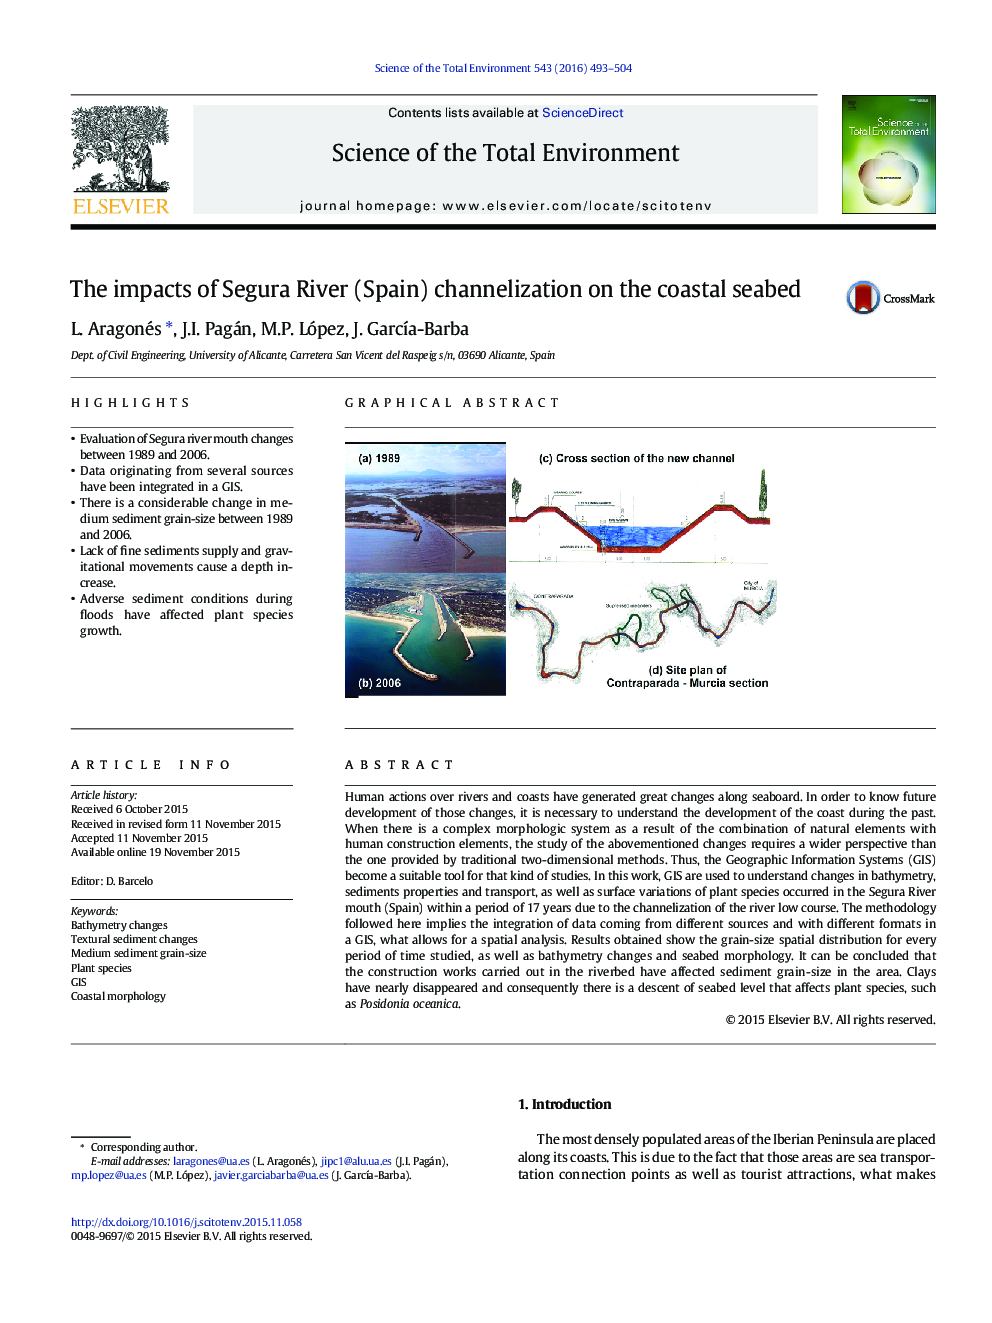 The impacts of Segura River (Spain) channelization on the coastal seabed